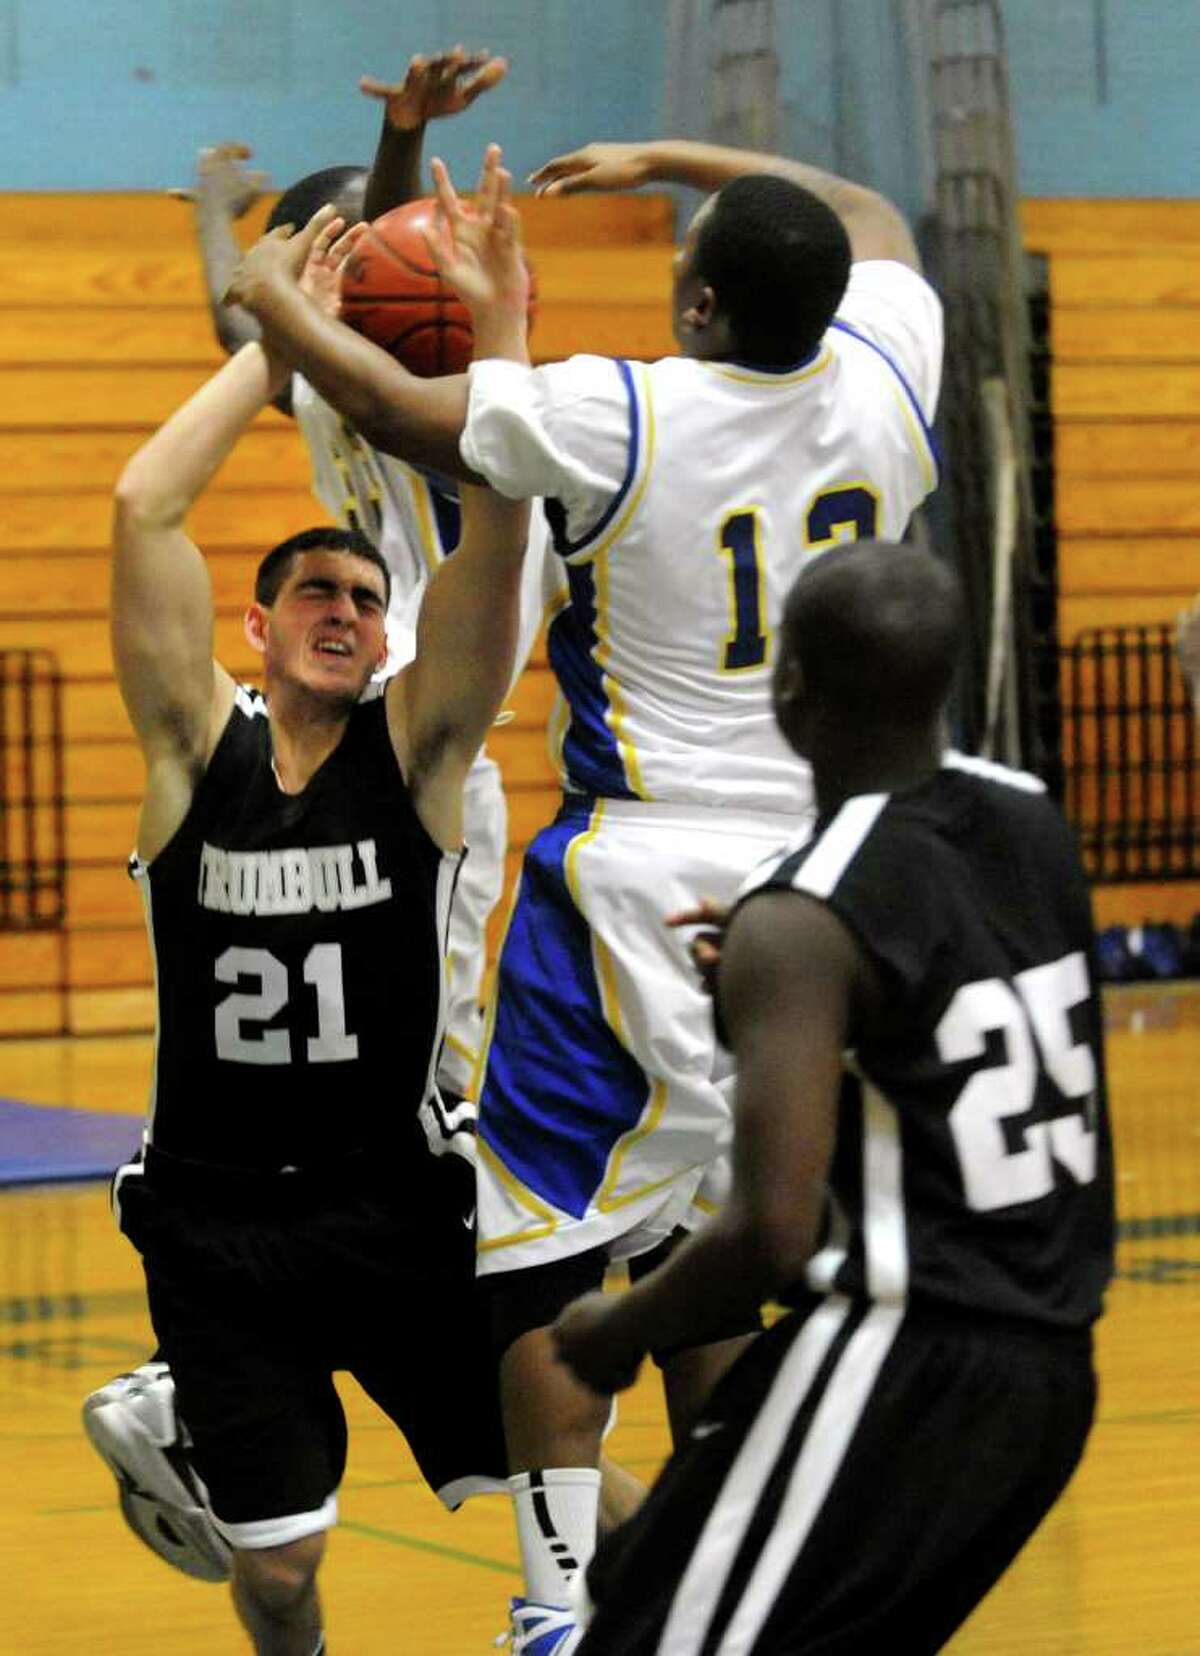 Harding's #12 Kayron Chappell, right, shuts down a shot attempt by Trumbull's #21 Tyler Paolini, during boys basketball action in Bridgeport, Conn. on Wednesday February 15, 2012.